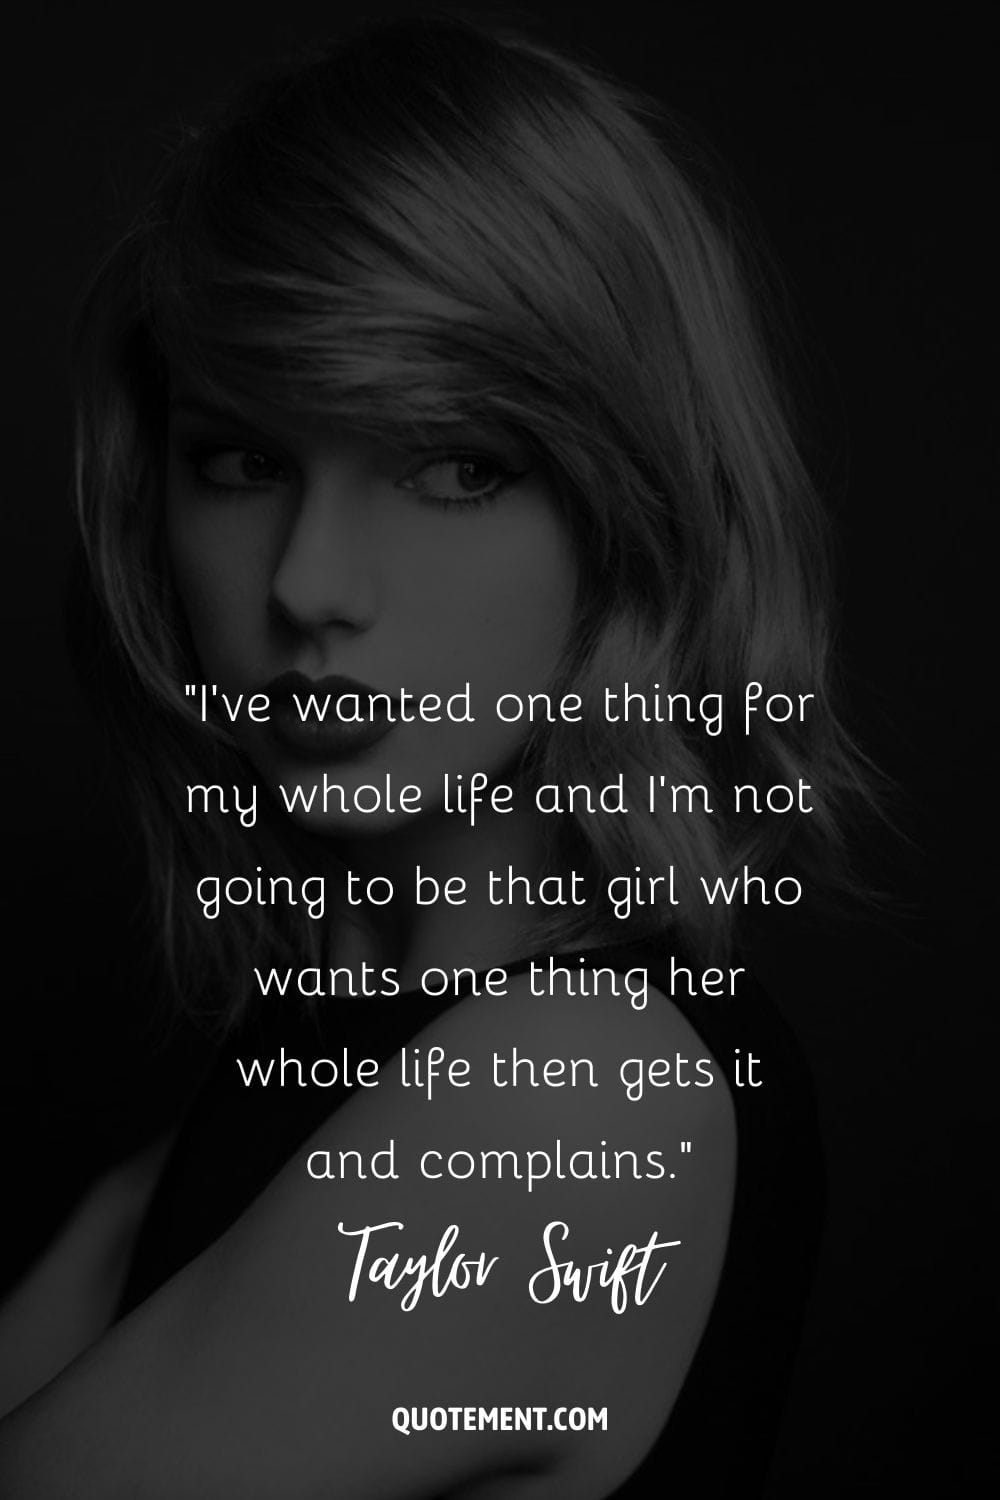 “I've wanted one thing for my whole life and I'm not going to be that girl who wants one thing her whole life then gets it and complains.” ― Taylor Swift